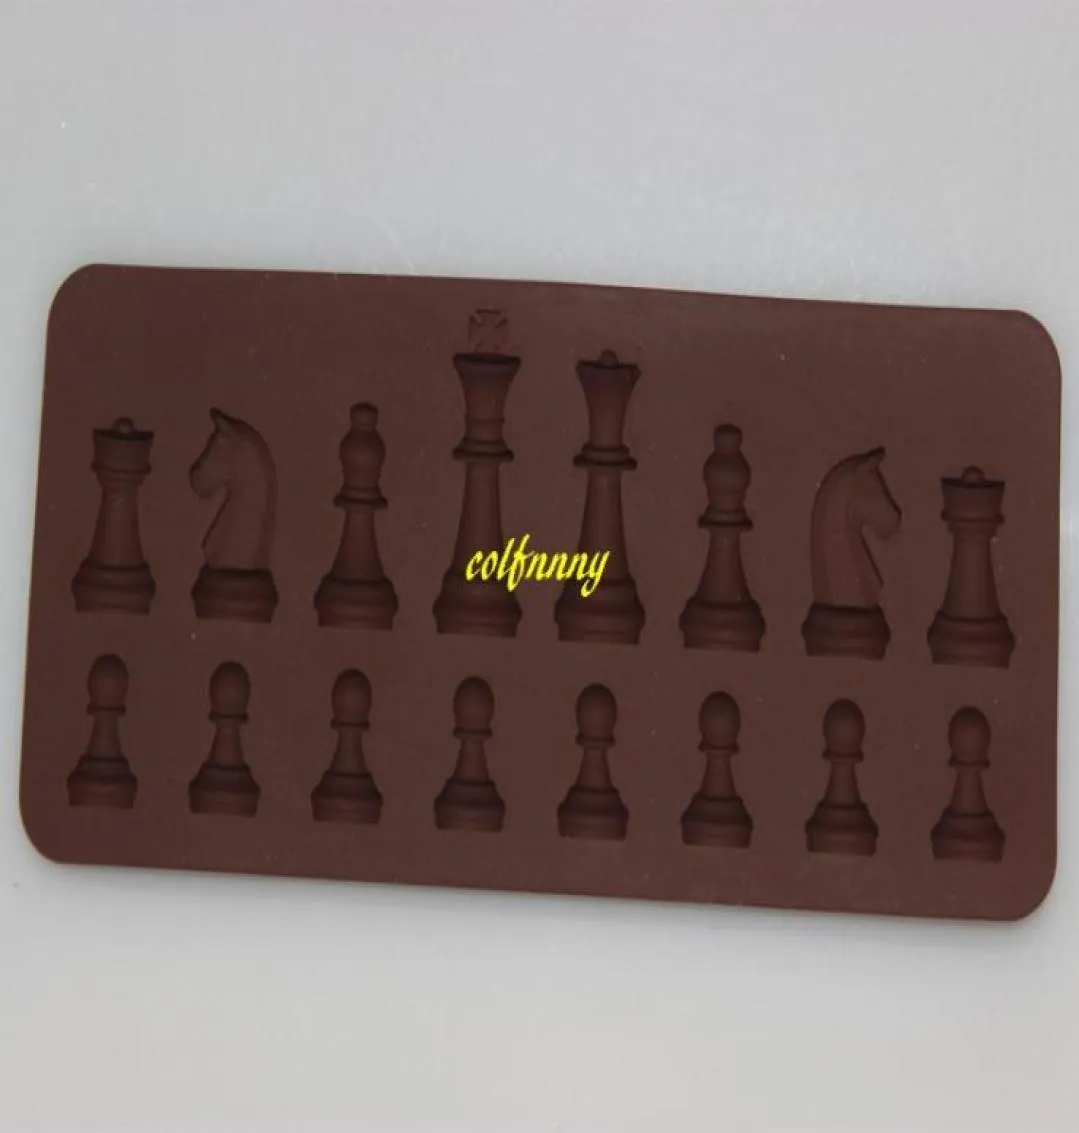 100pcslot Fast New International Chess Silicone Mold Fondant Cake Chocolate Forms For Kitchen Baking7522824